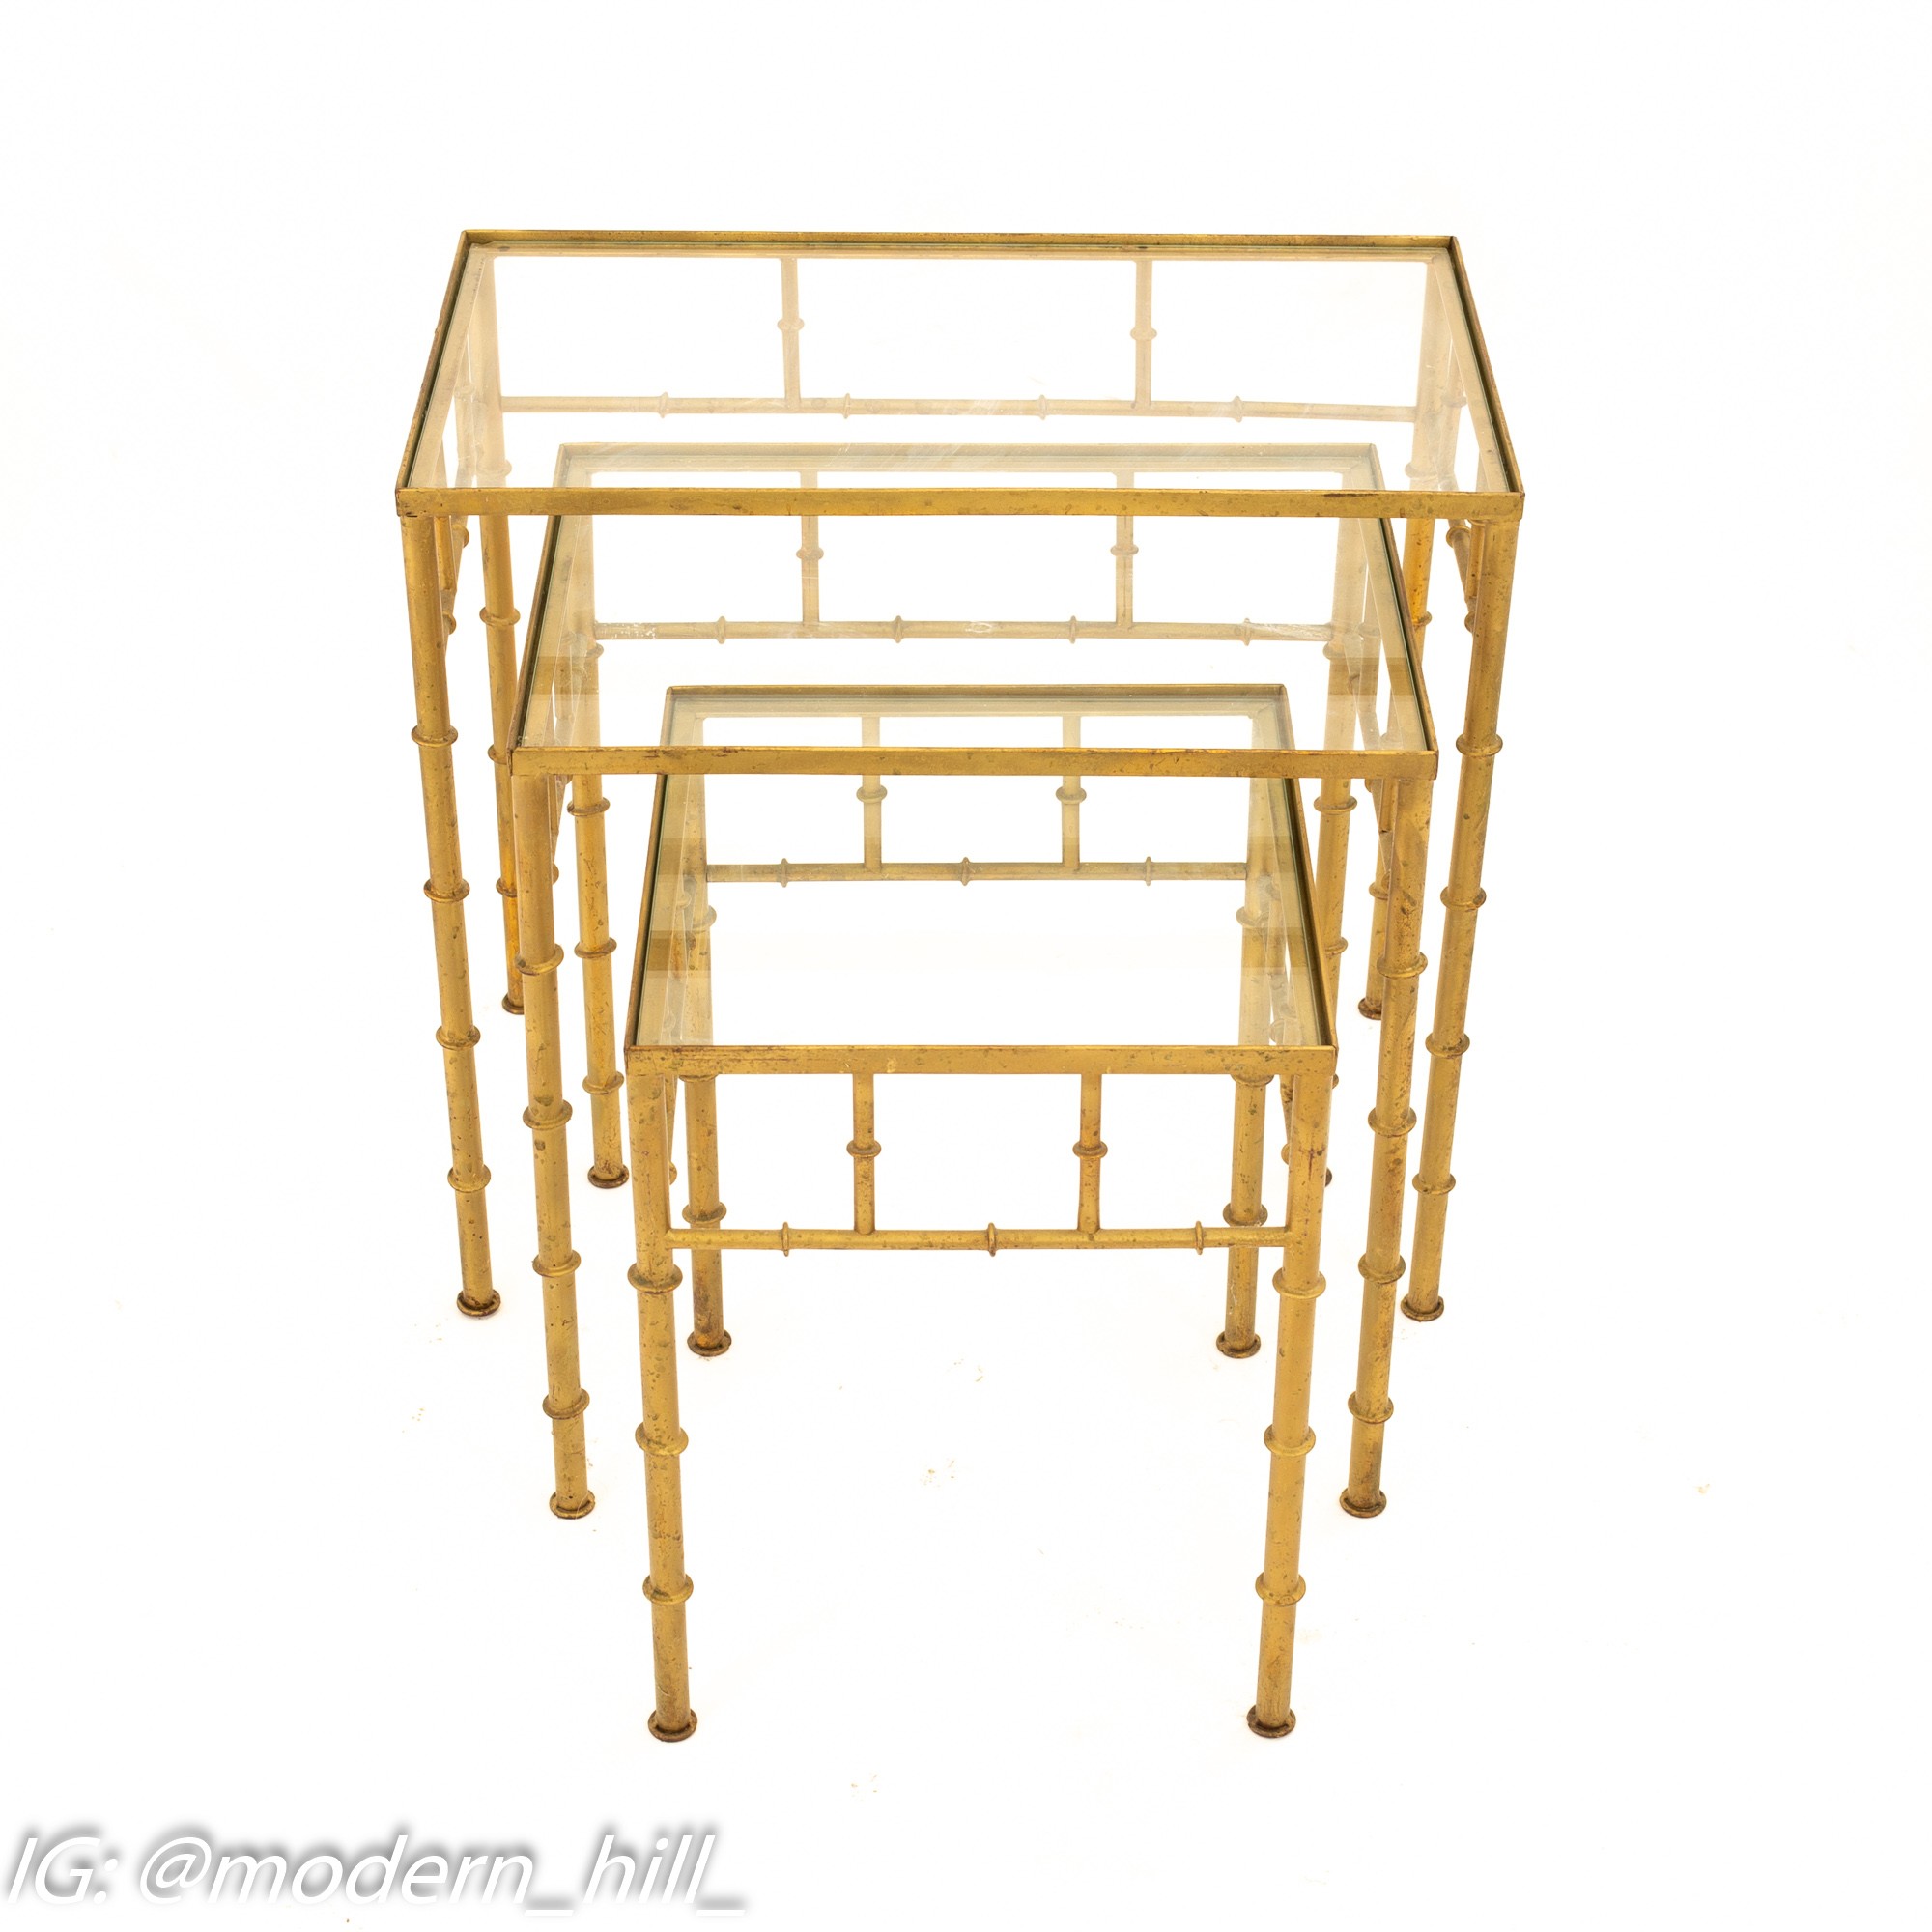 SOLD Nesting tables are timeless and this set is fabulous! ✨This vintage  gold metal faux bamboo trio with glass will add a little class